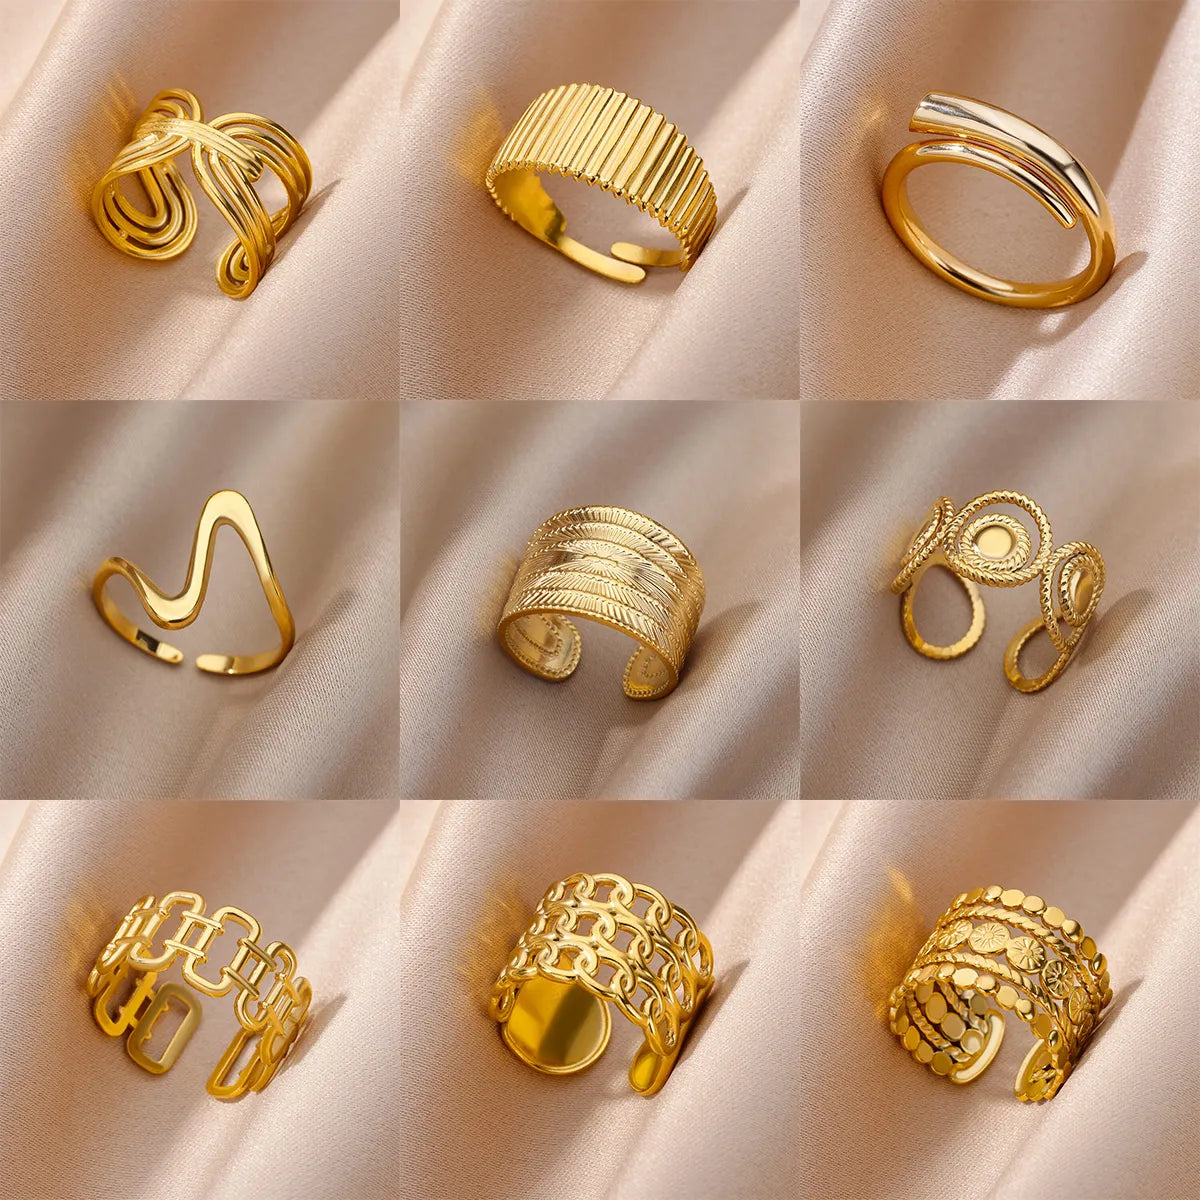 Stainless Steel Rings For Women Men Gold Color Open Gothic Geometric Ring Female Male Fashion Engagement Wedding Party Jewelry-Dollar Bargains Online Shopping Australia